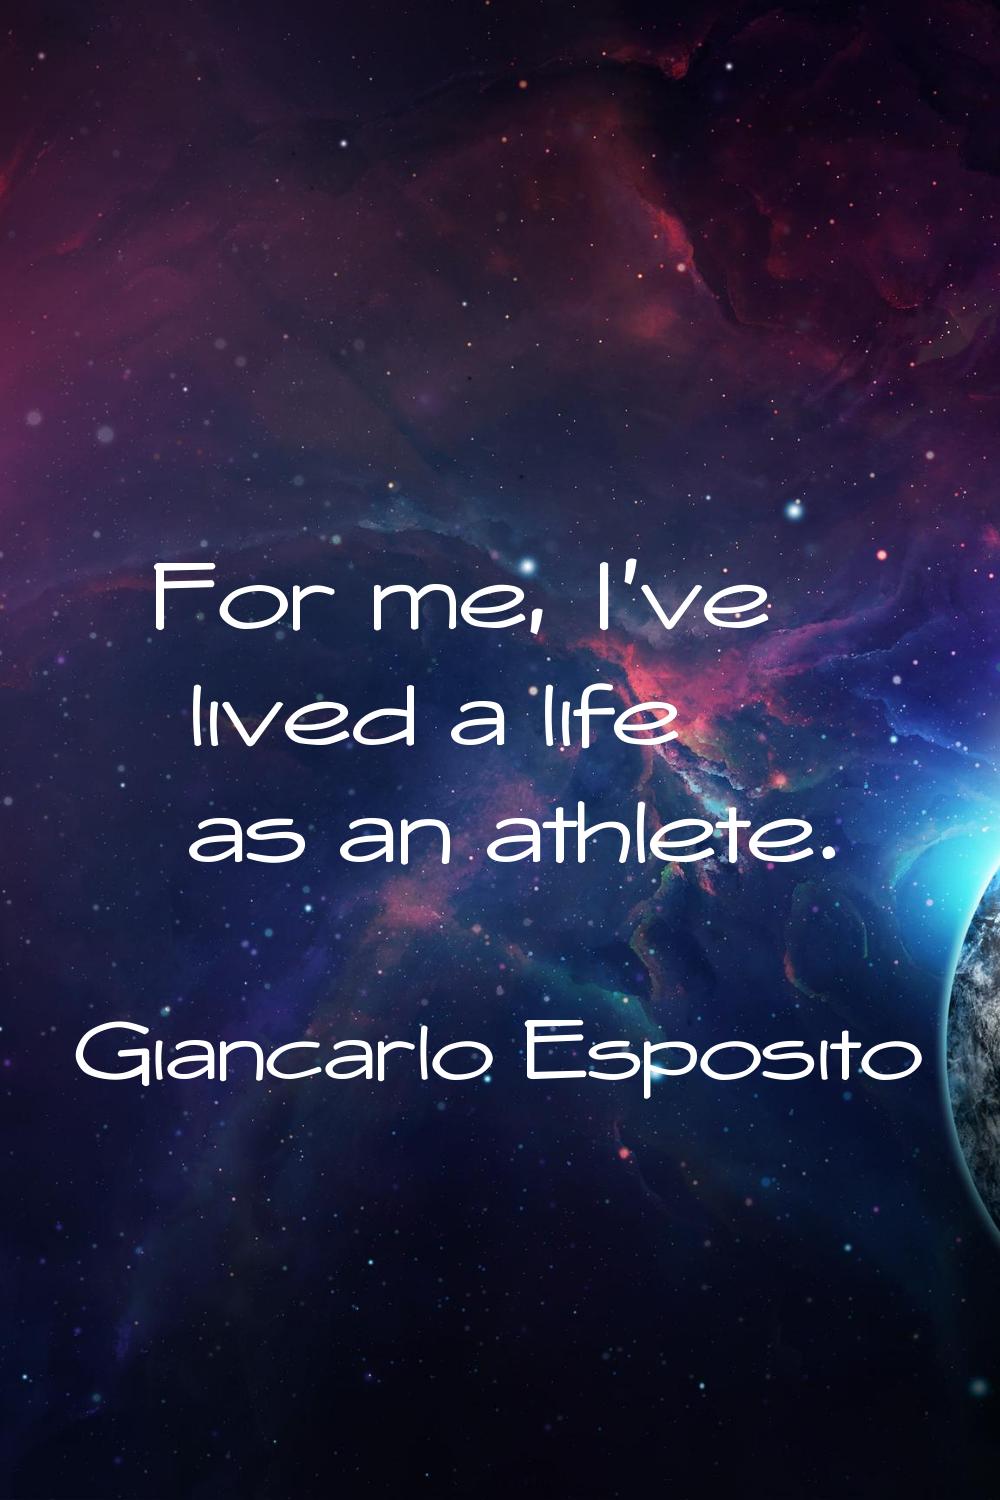 For me, I've lived a life as an athlete.